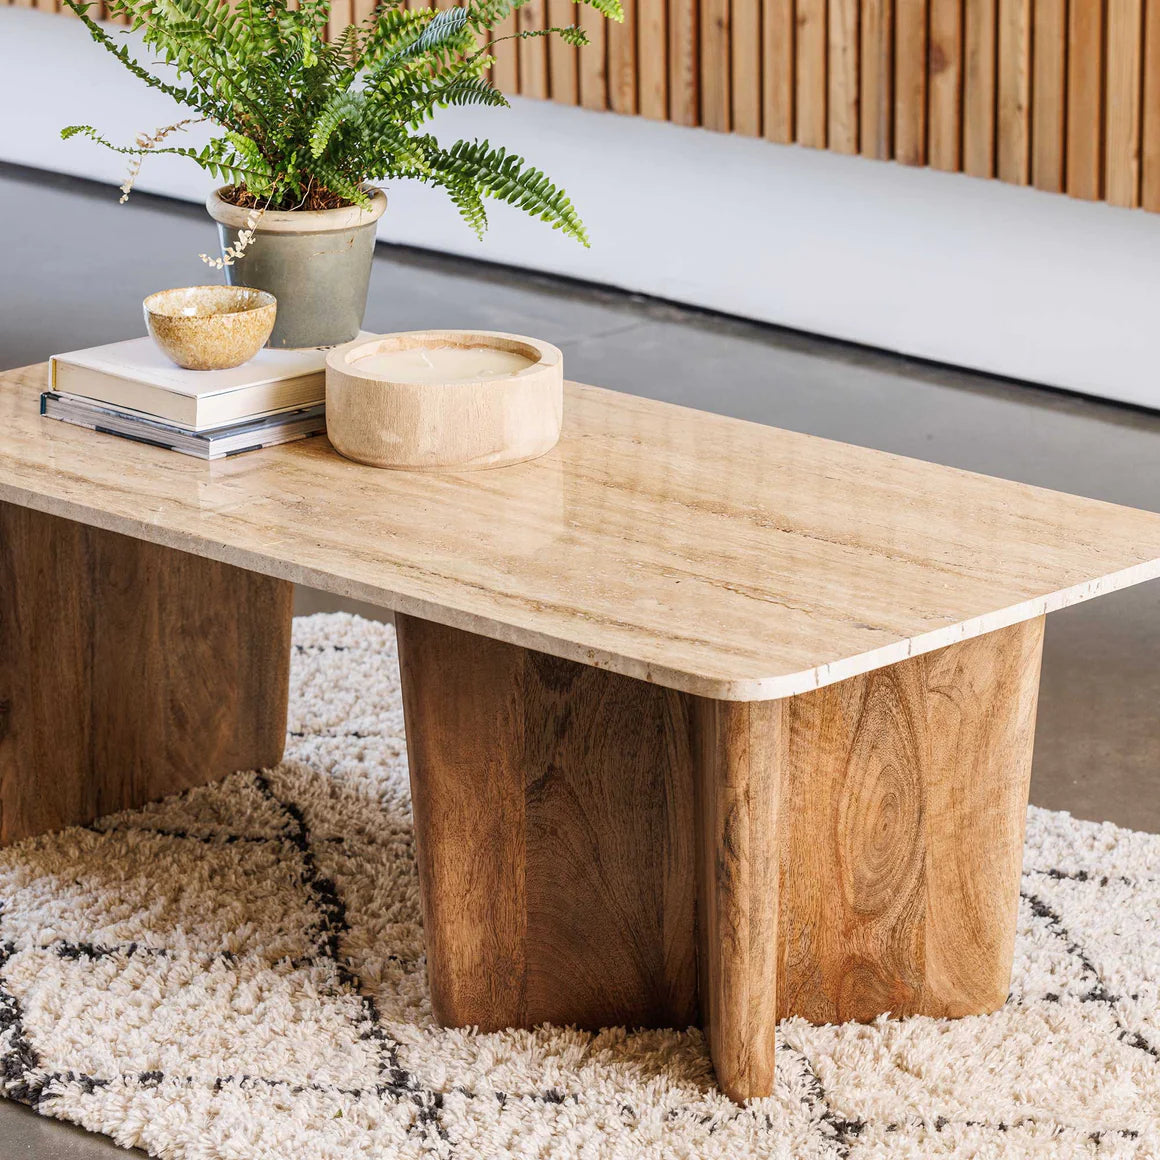 Savannah wooden coffee table with shelf